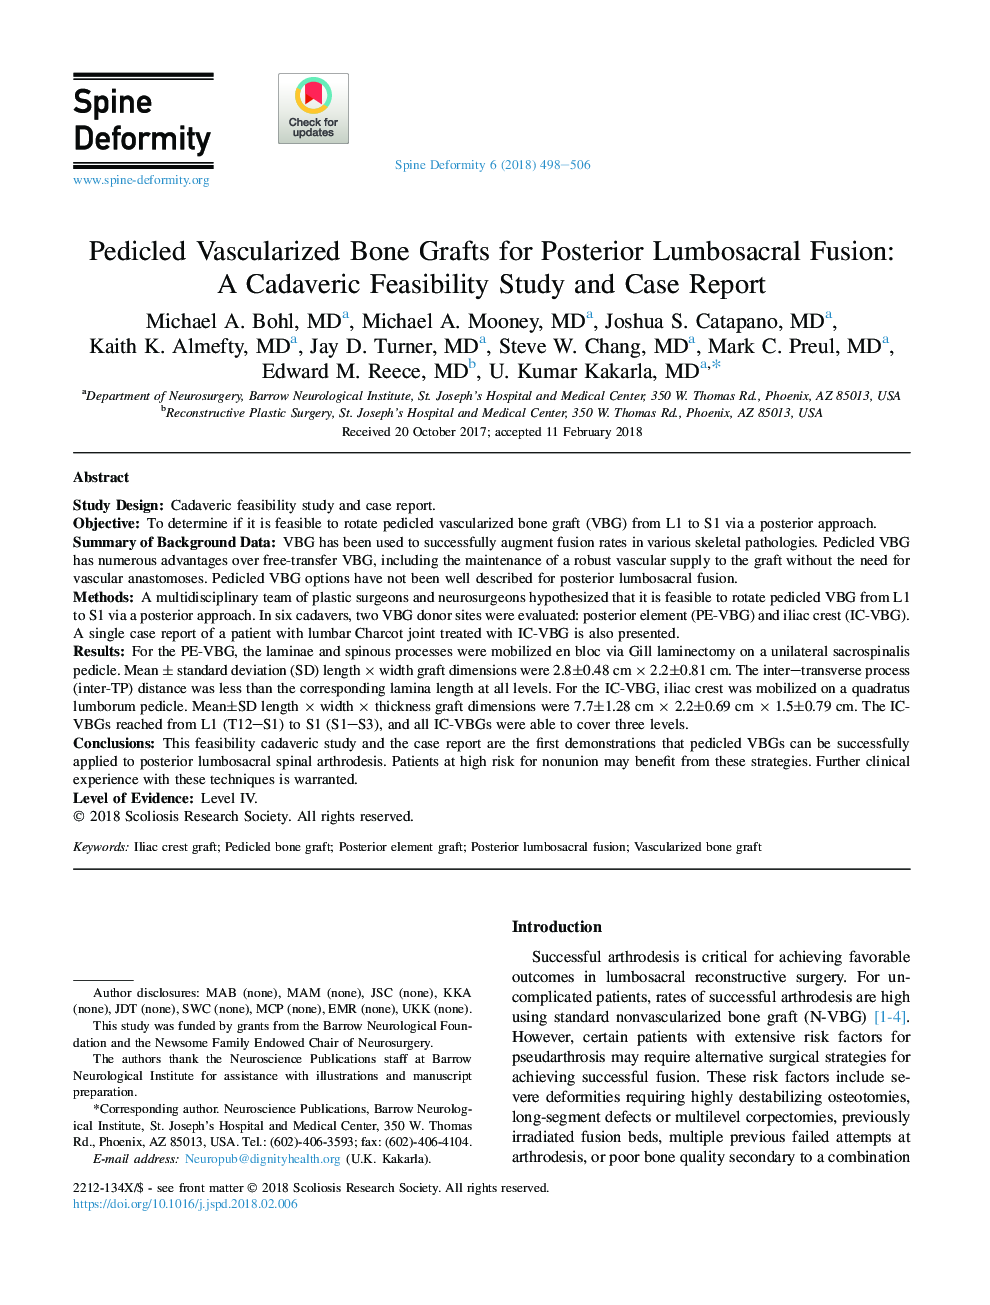 Pedicled Vascularized Bone Grafts for Posterior Lumbosacral Fusion: AÂ Cadaveric Feasibility Study and Case Report